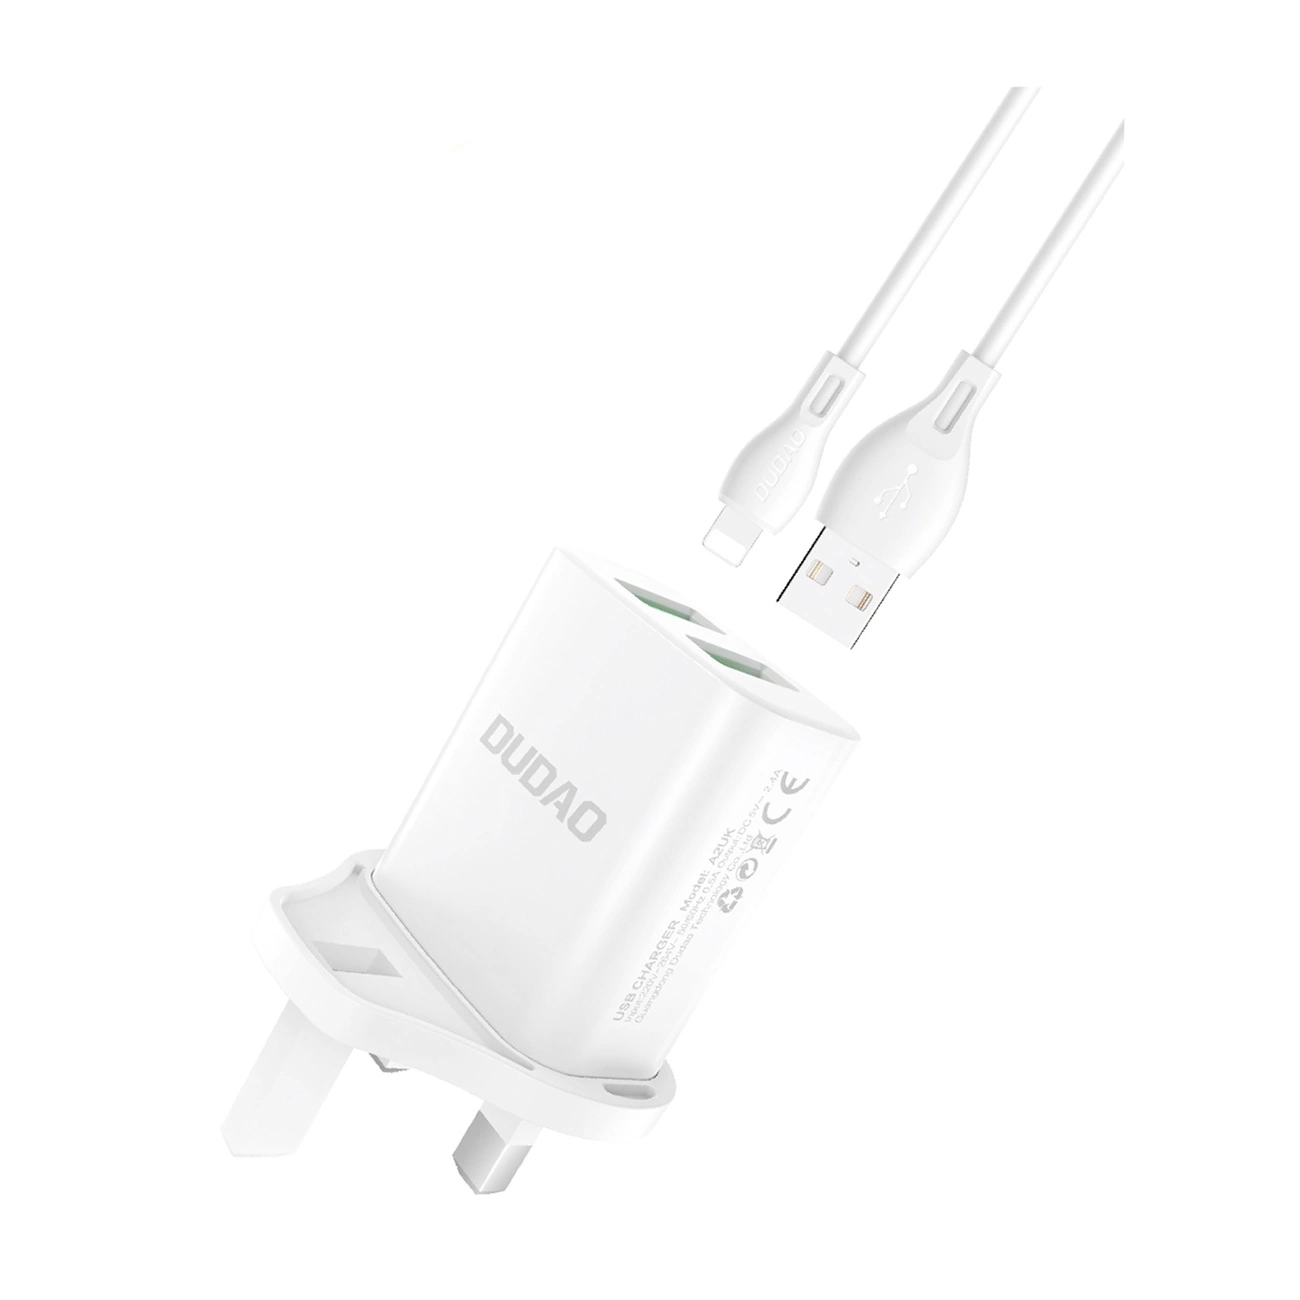 Dudao wall charger with UK plug (Great Britain) 2xUSB-A 2.4A white + USB-A cable - microUSB 1m A2UKM (6970379616192) USB kabelis